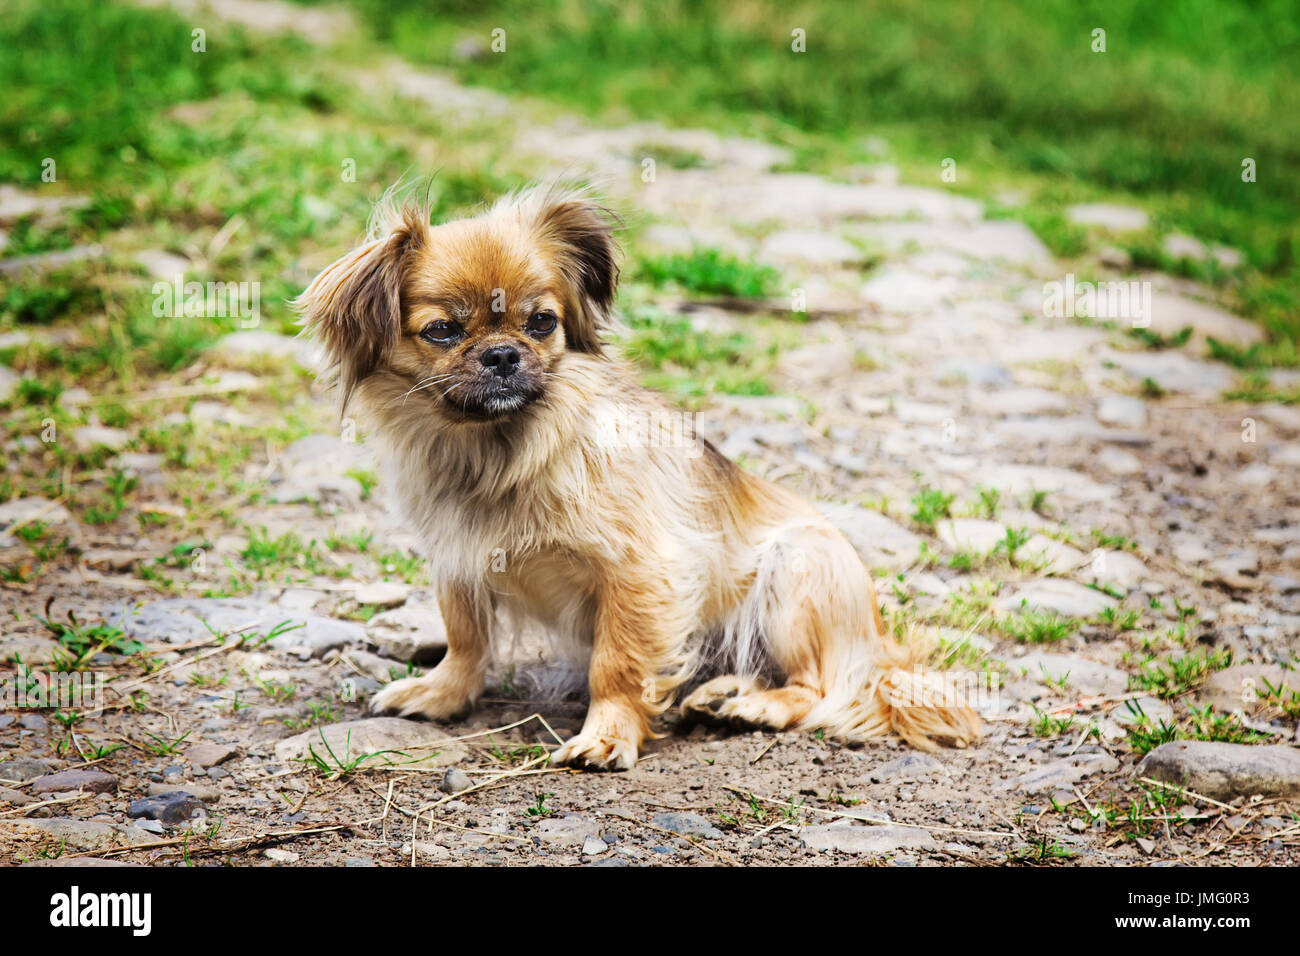 Portrait Of Pekingese Dog On A Grass Outdoor Stock Photo